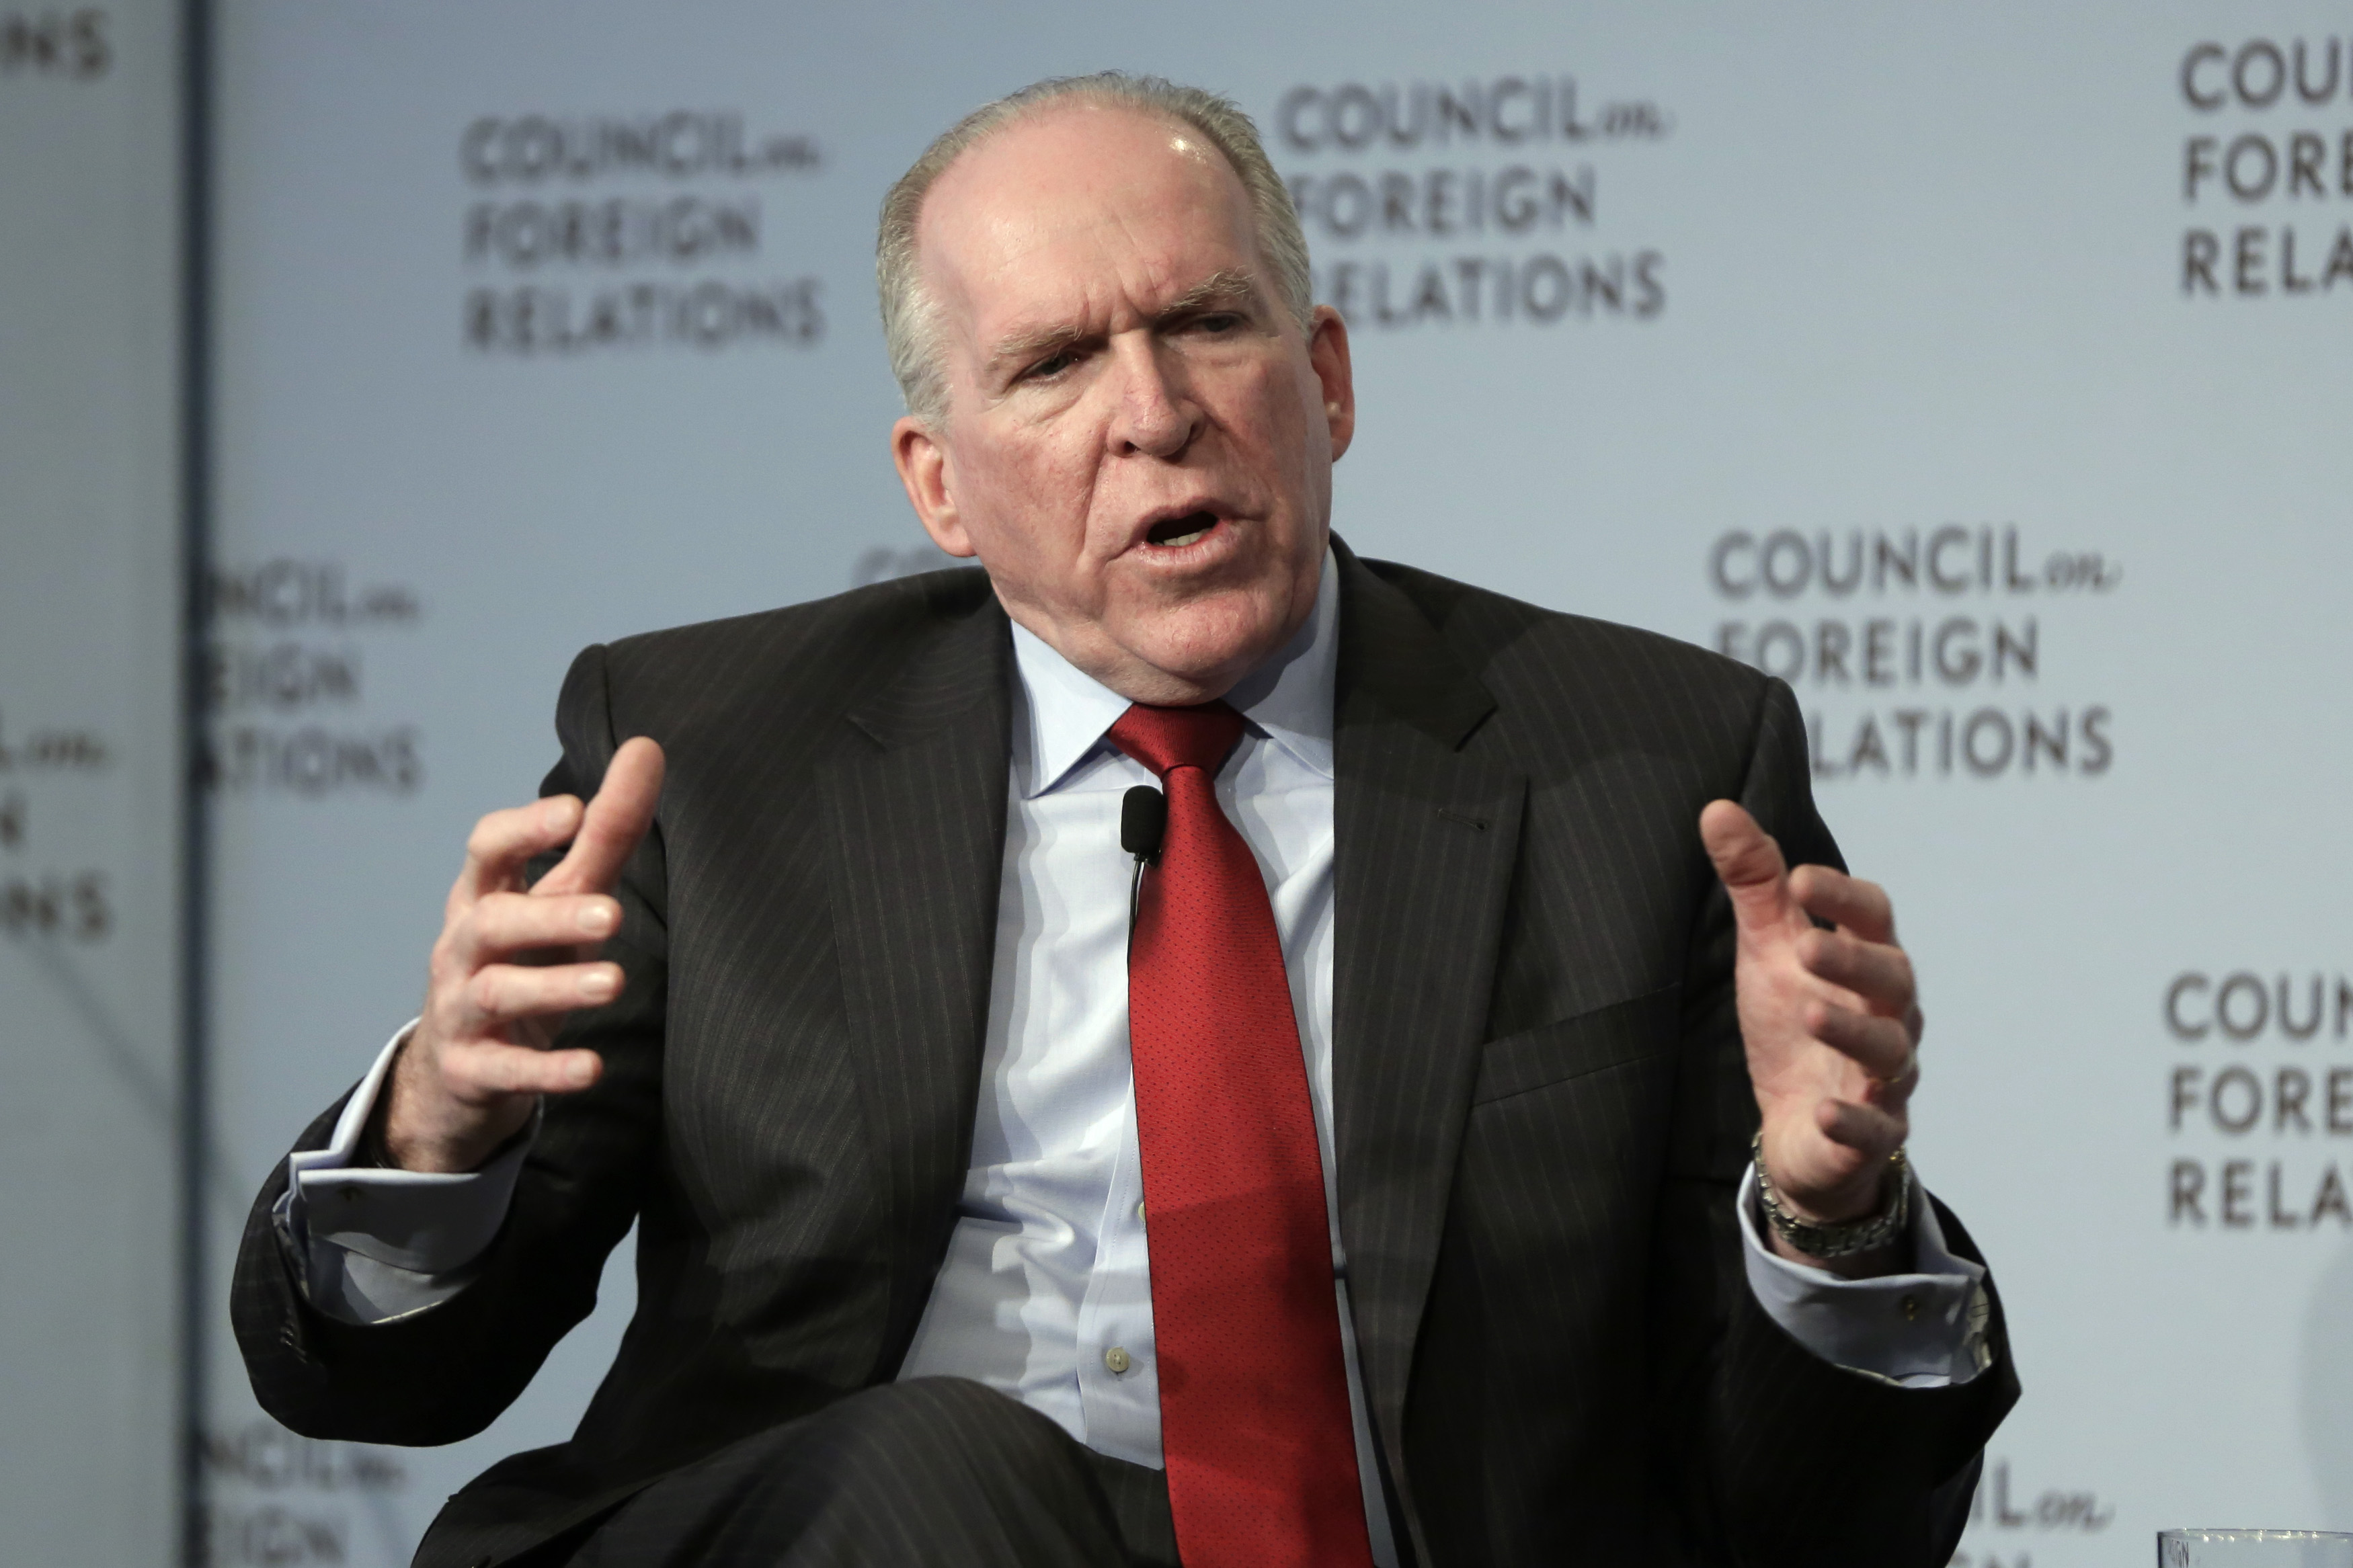 CIA Director John Brennan addresses a meeting at the Council on Foreign Relations, in New York, Friday, March 13, 2015. (Richard Drew—AP)